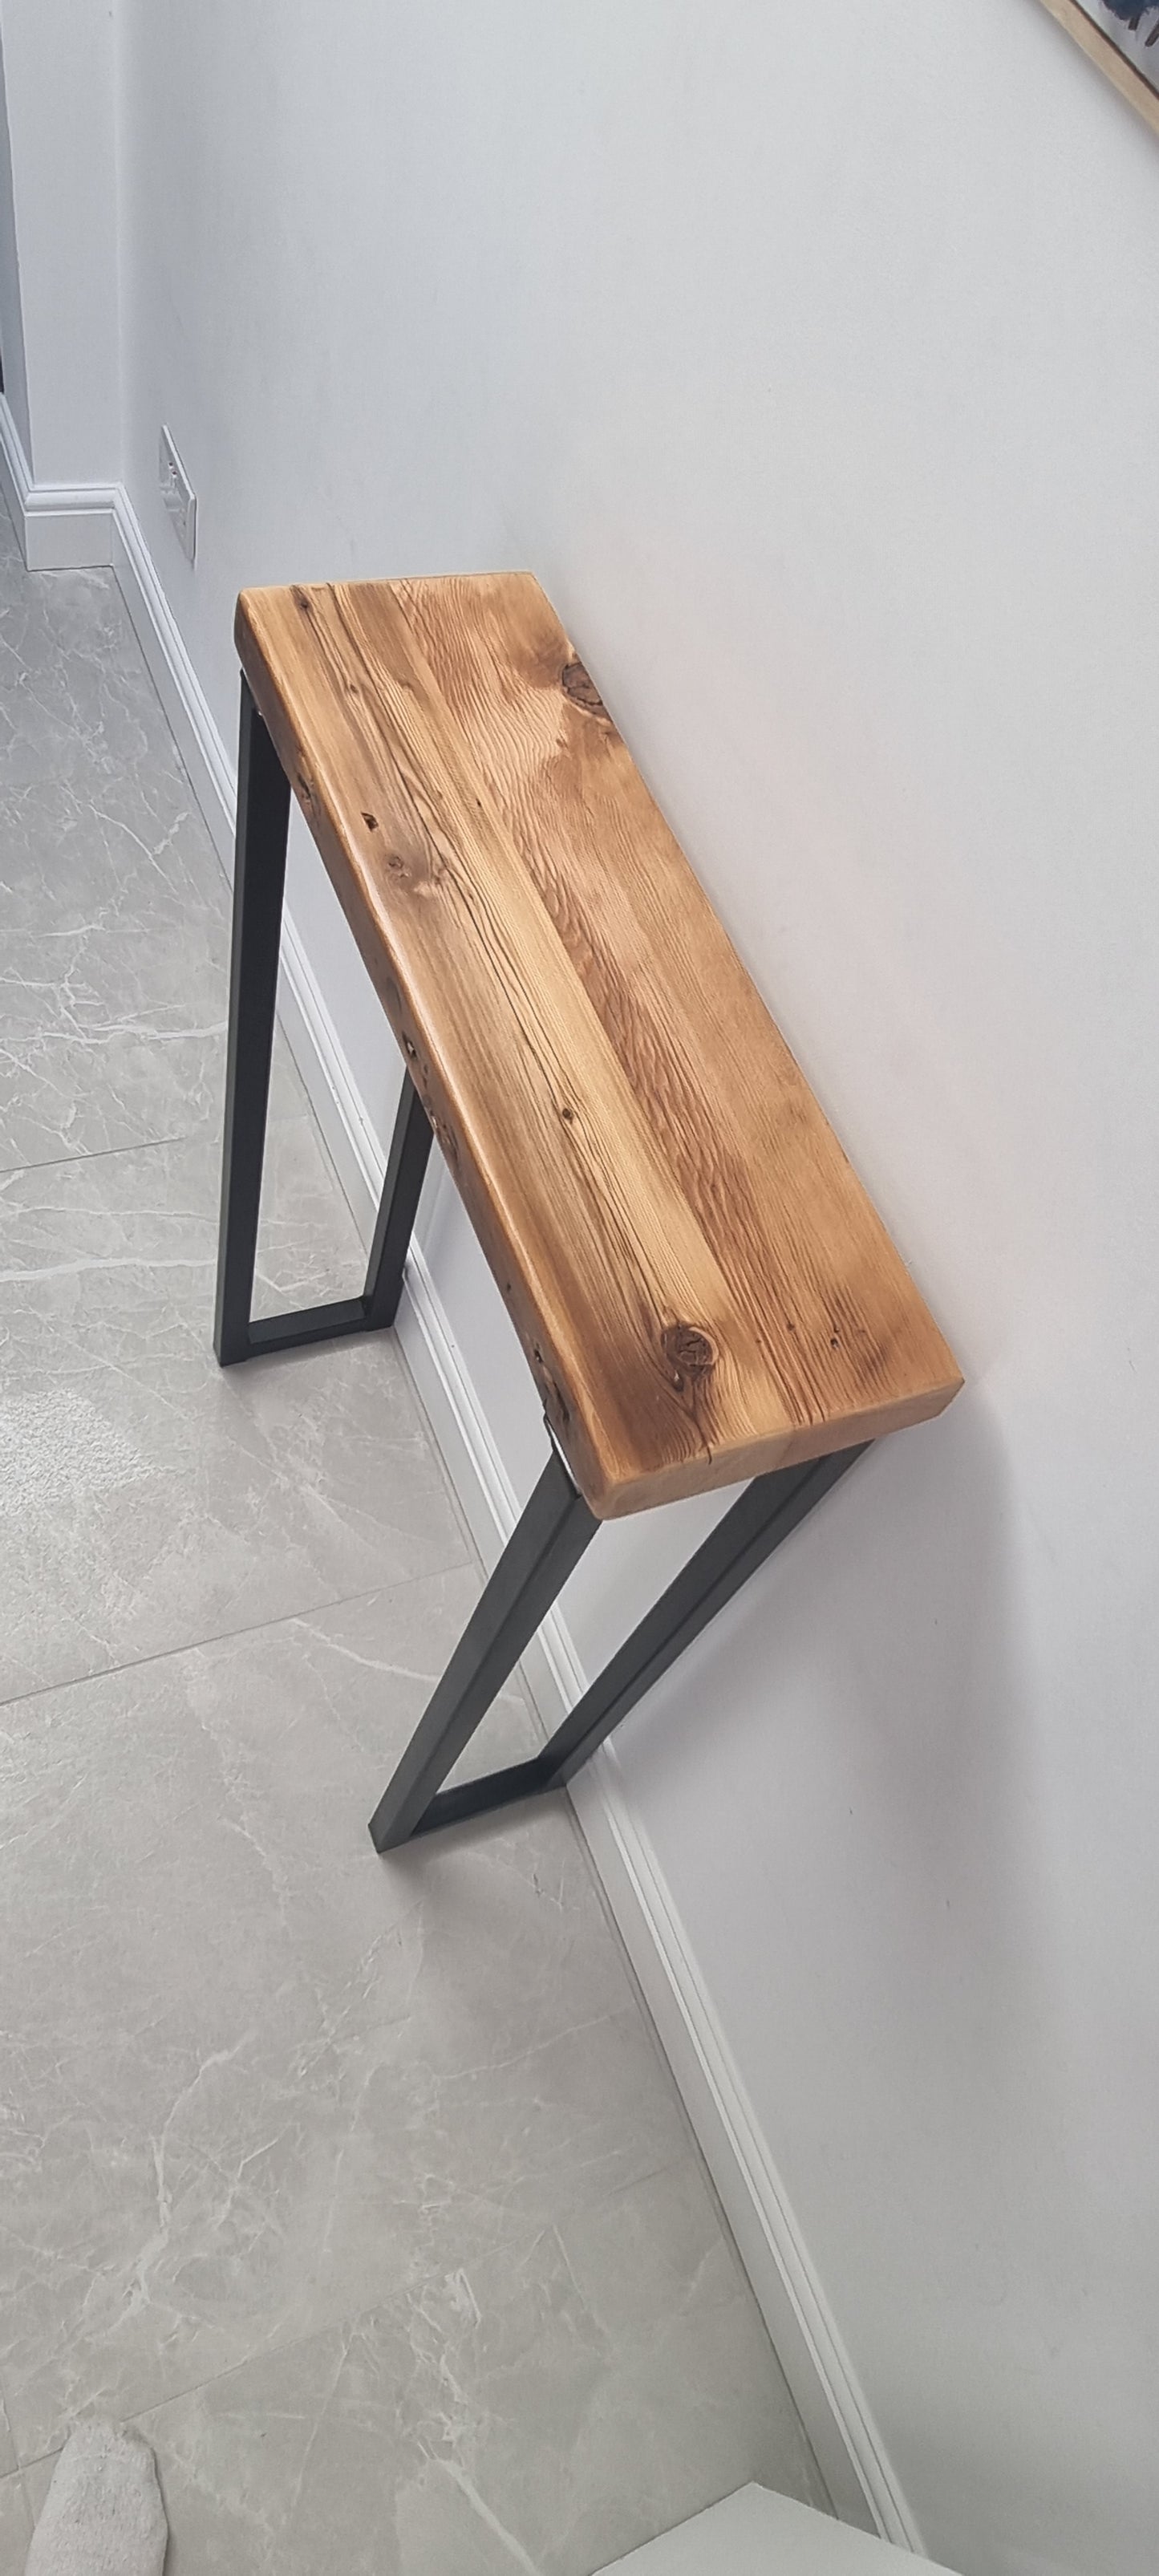 Narrow console table with square legs